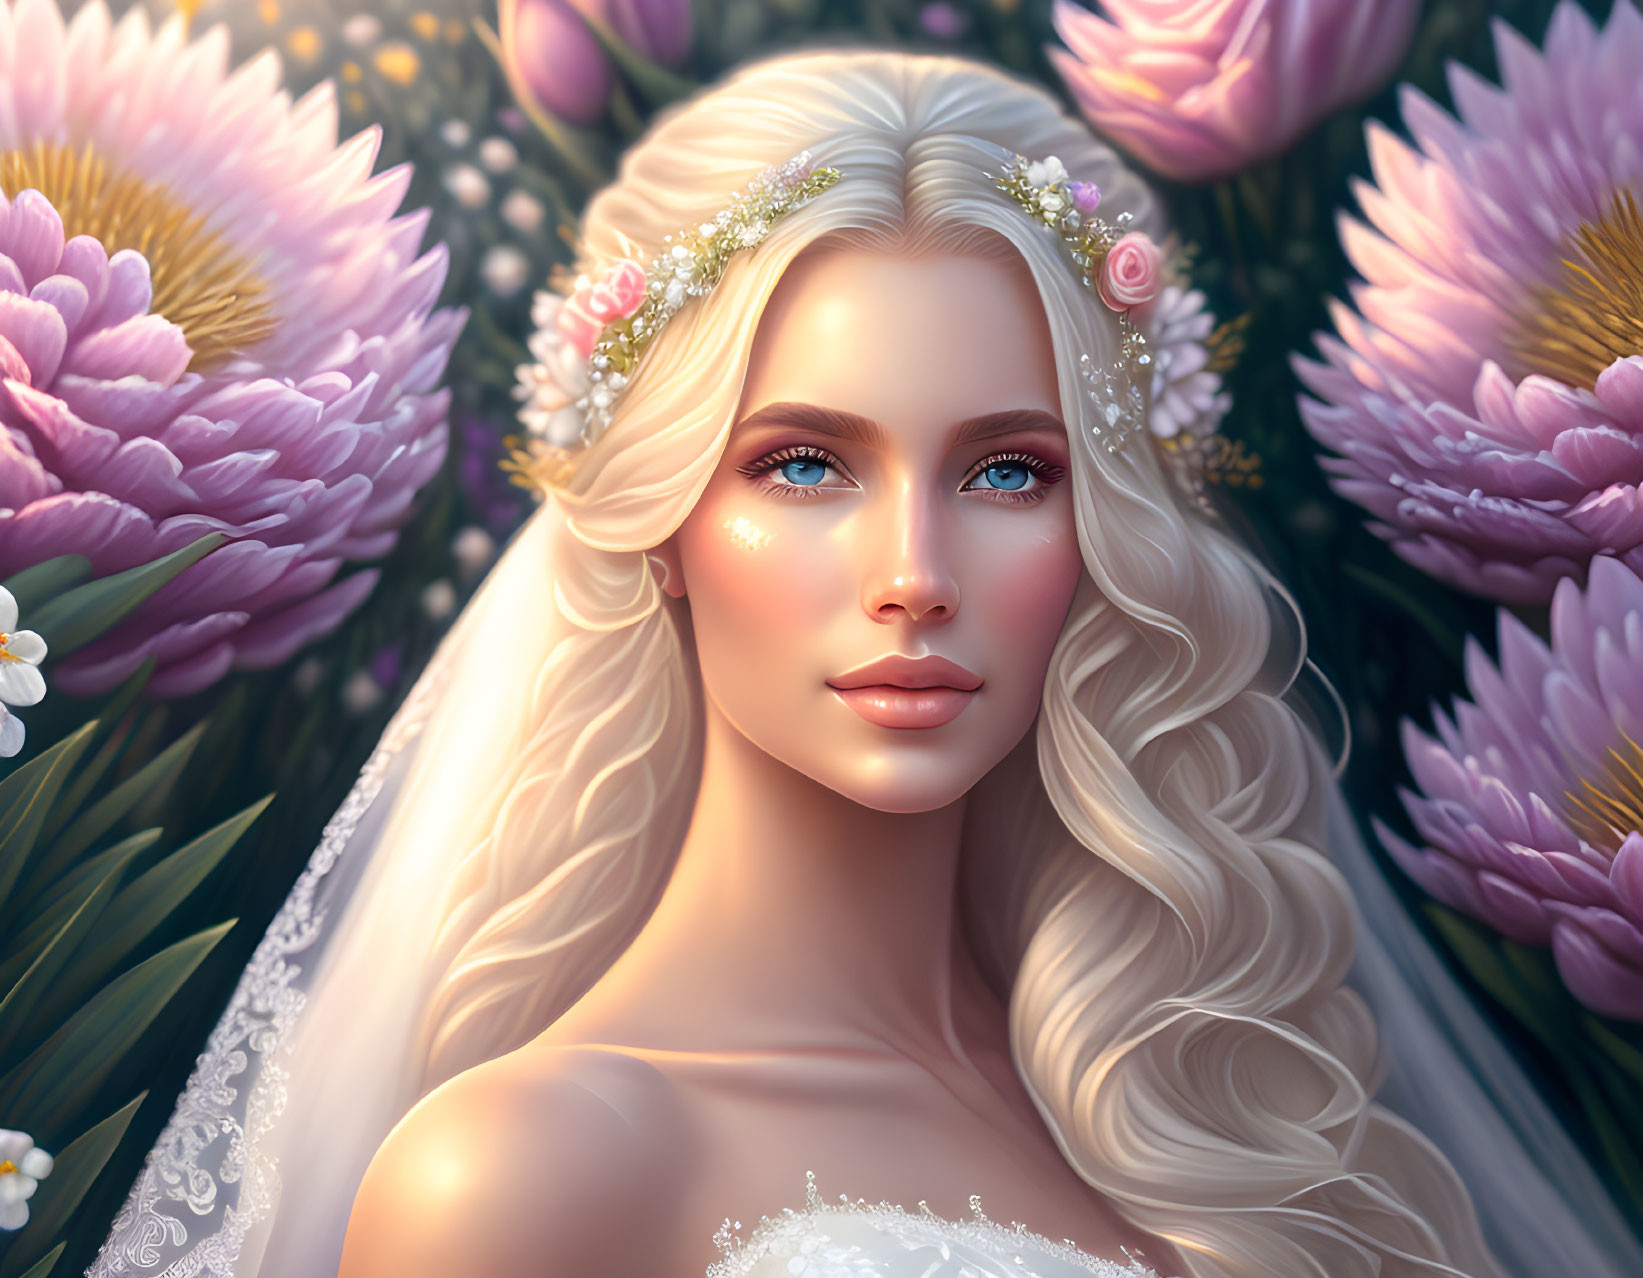 Blonde Bride Portrait with Blue Eyes and Floral Tiara